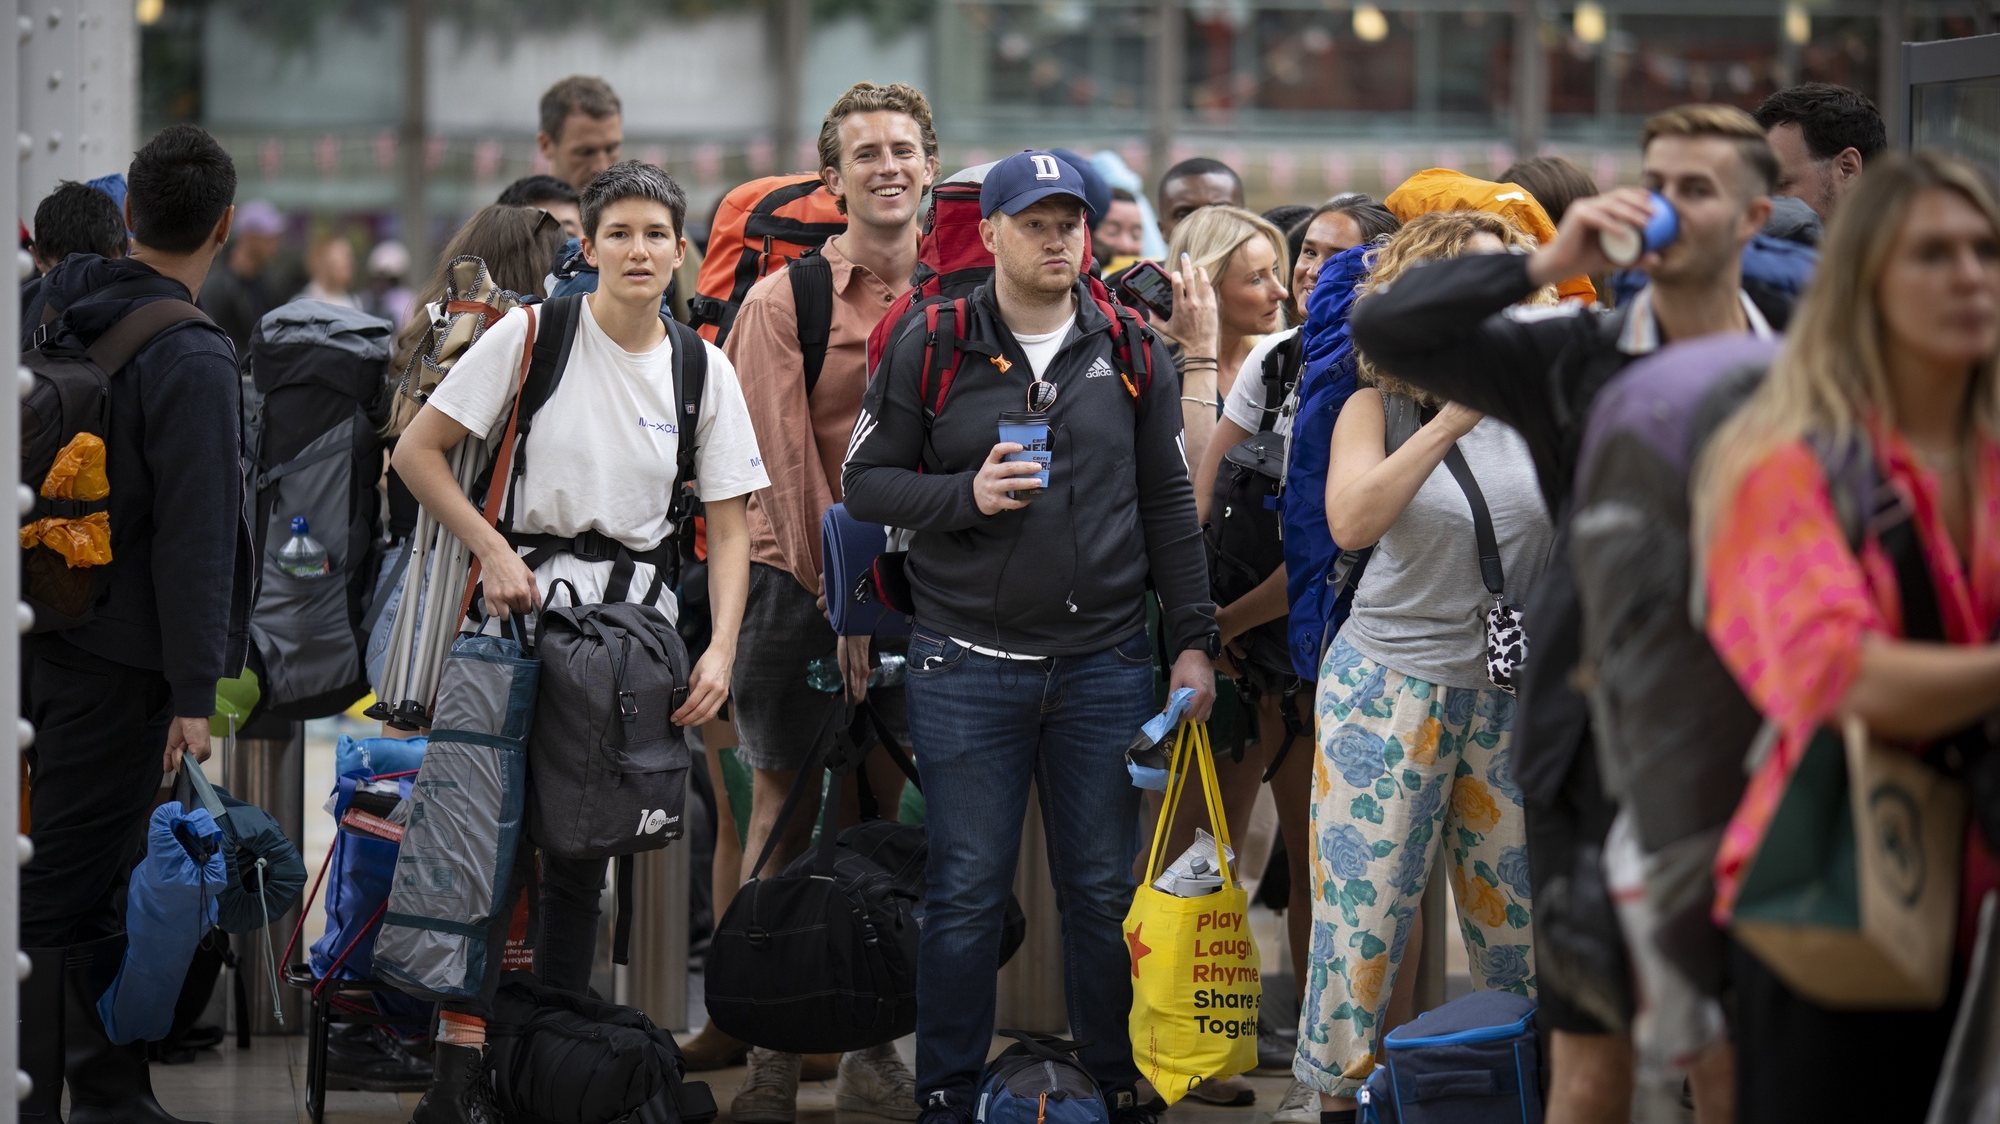 epa10029601 Passengers travel to Glastonbury Festival from Paddington station during a national train strike in London, Britain, 23 June 2022. Britain is facing the second day of train strike as part of the biggest national rail strike in 30 years, crippling the transport network for millions in the UK.  EPA/TOLGA AKMEN